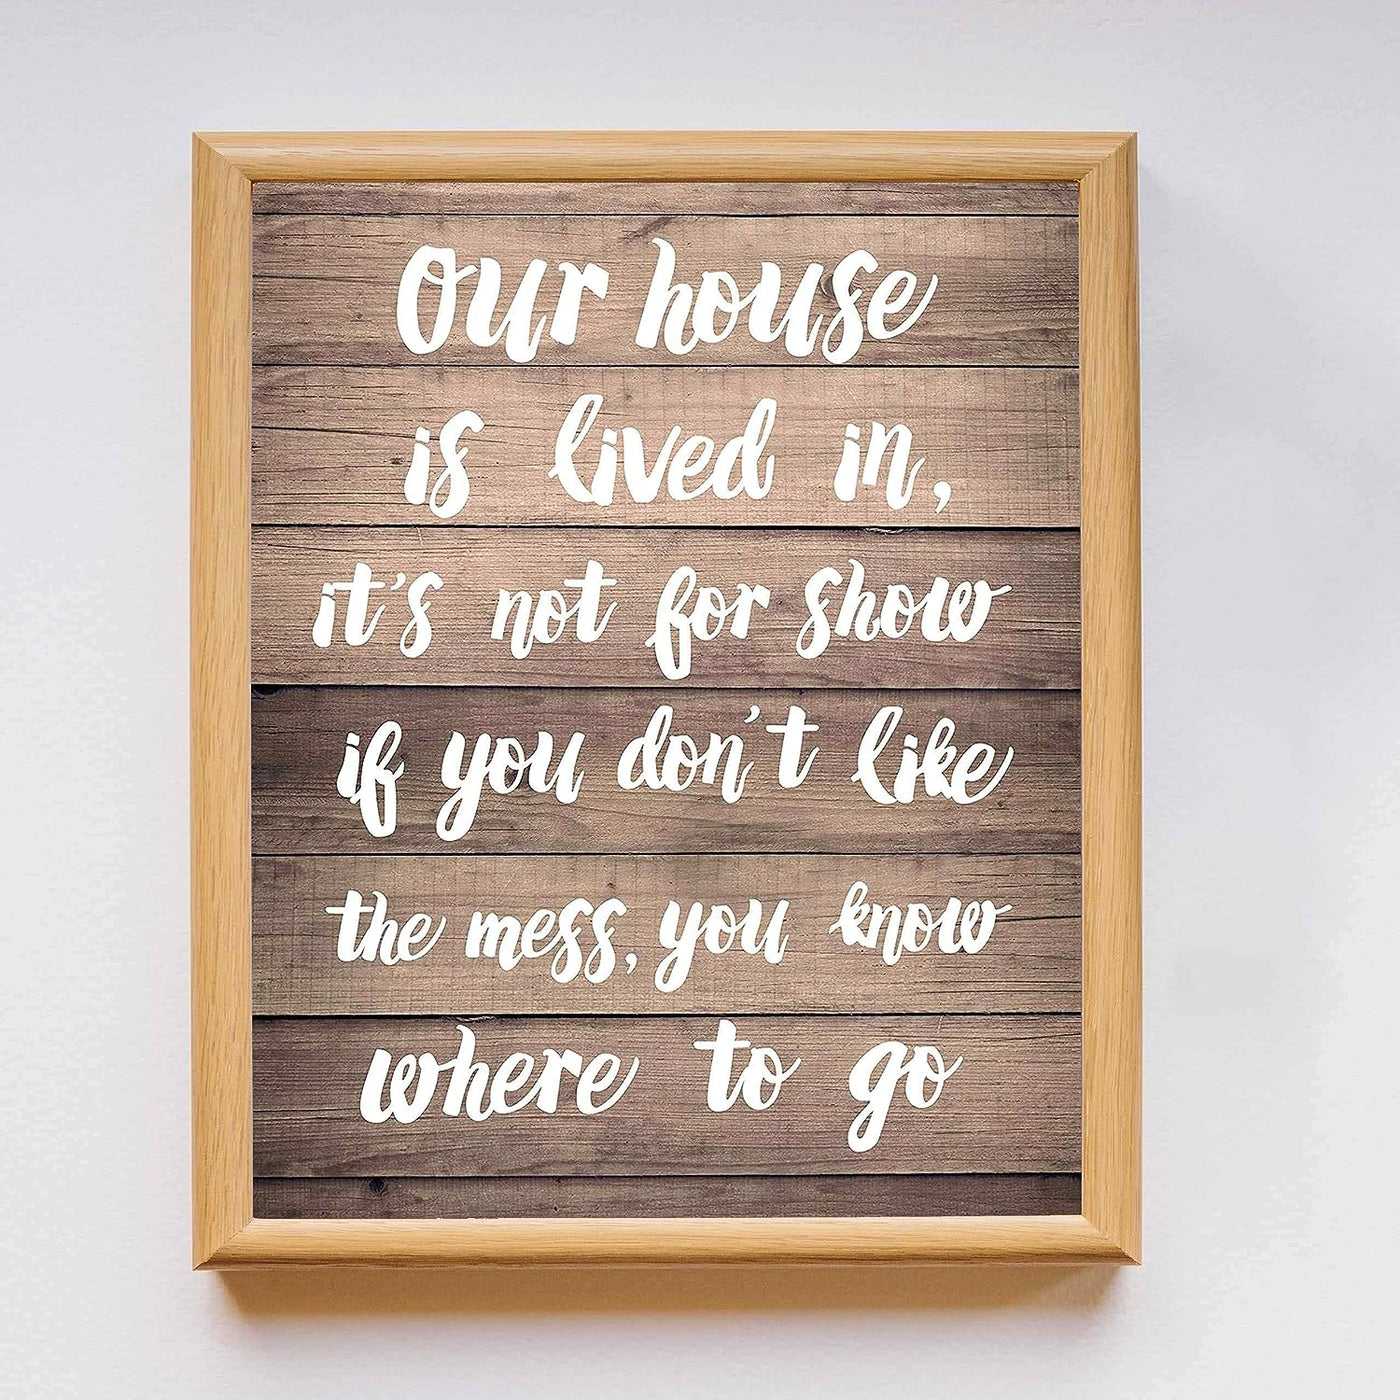 Don't Like The Mess, You Know Where To Go Funny Family Wall Sign -11 x 14" Typographic Art Print-Ready to Frame. Humorous Home-Entryway-Porch Decor. Fun Welcome Sign! Printed on Paper, Not Wood.